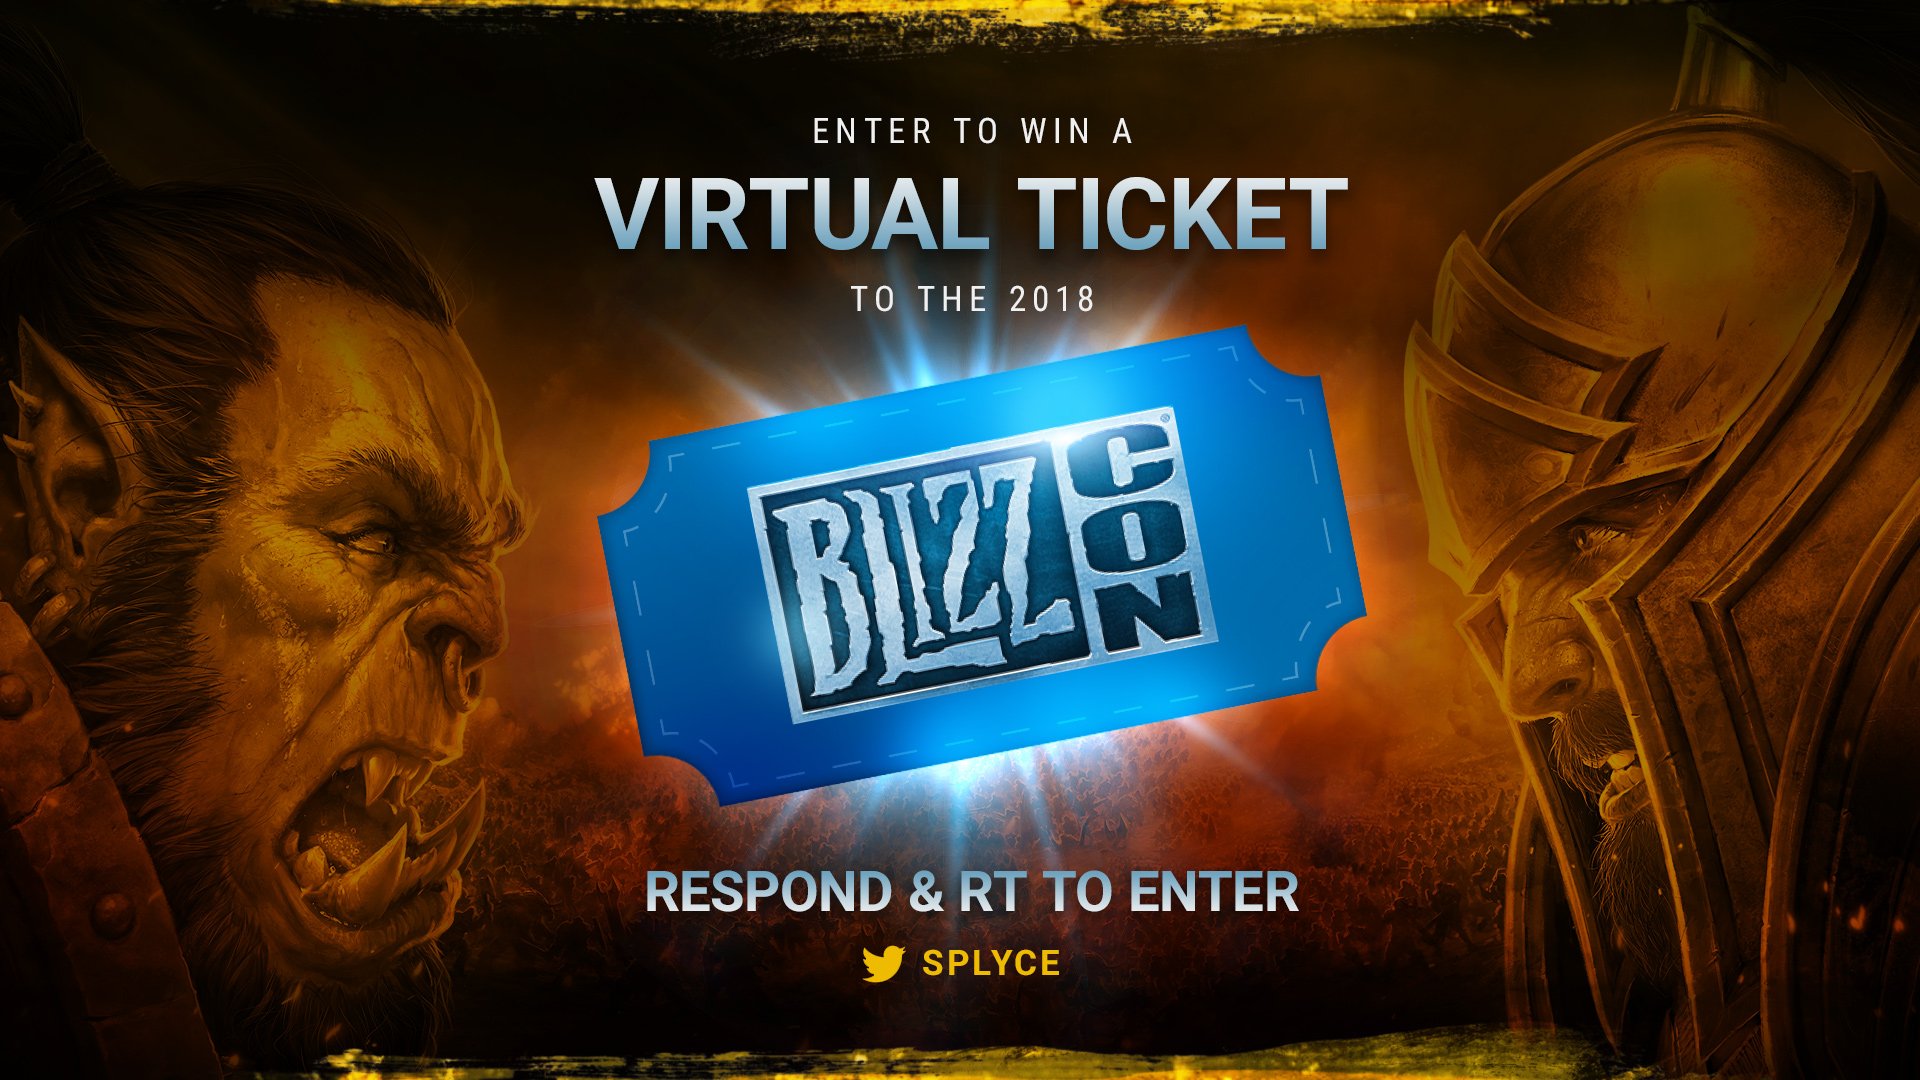 Splyce on Twitter "We have BlizzCon Virtual Tickets to give away this